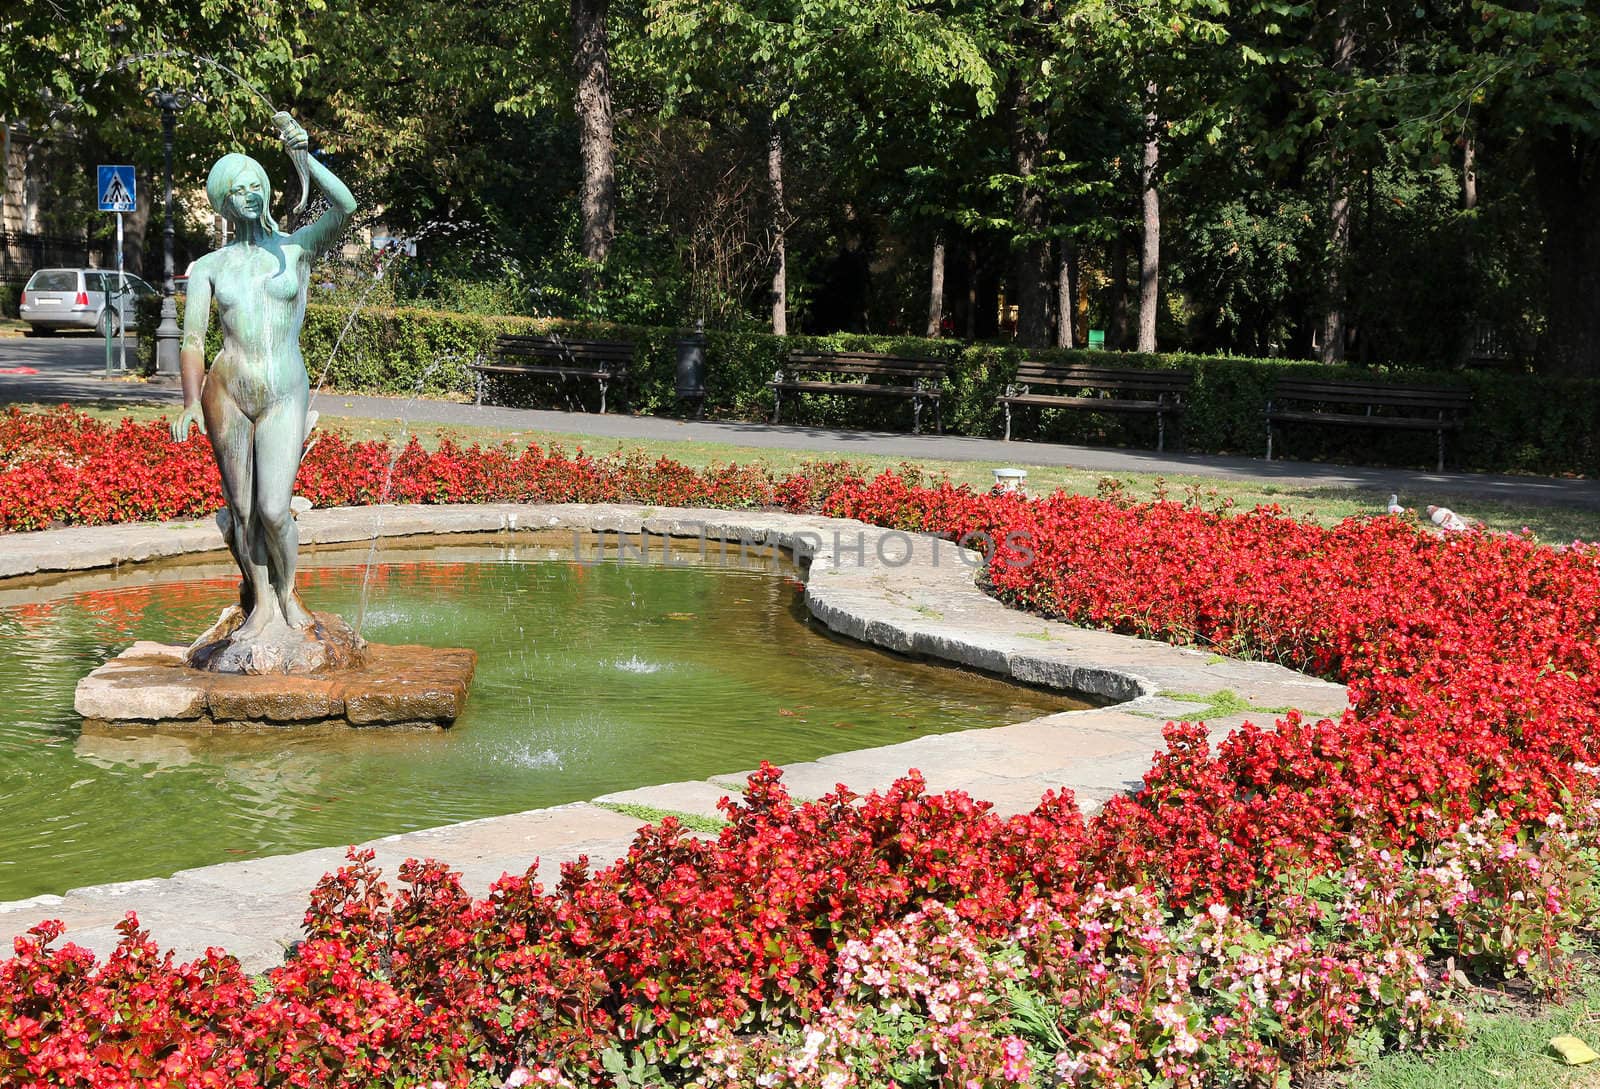 Novi Sad, Serbia - city in the region of Vojvodina. Flowers and fountain in the park.